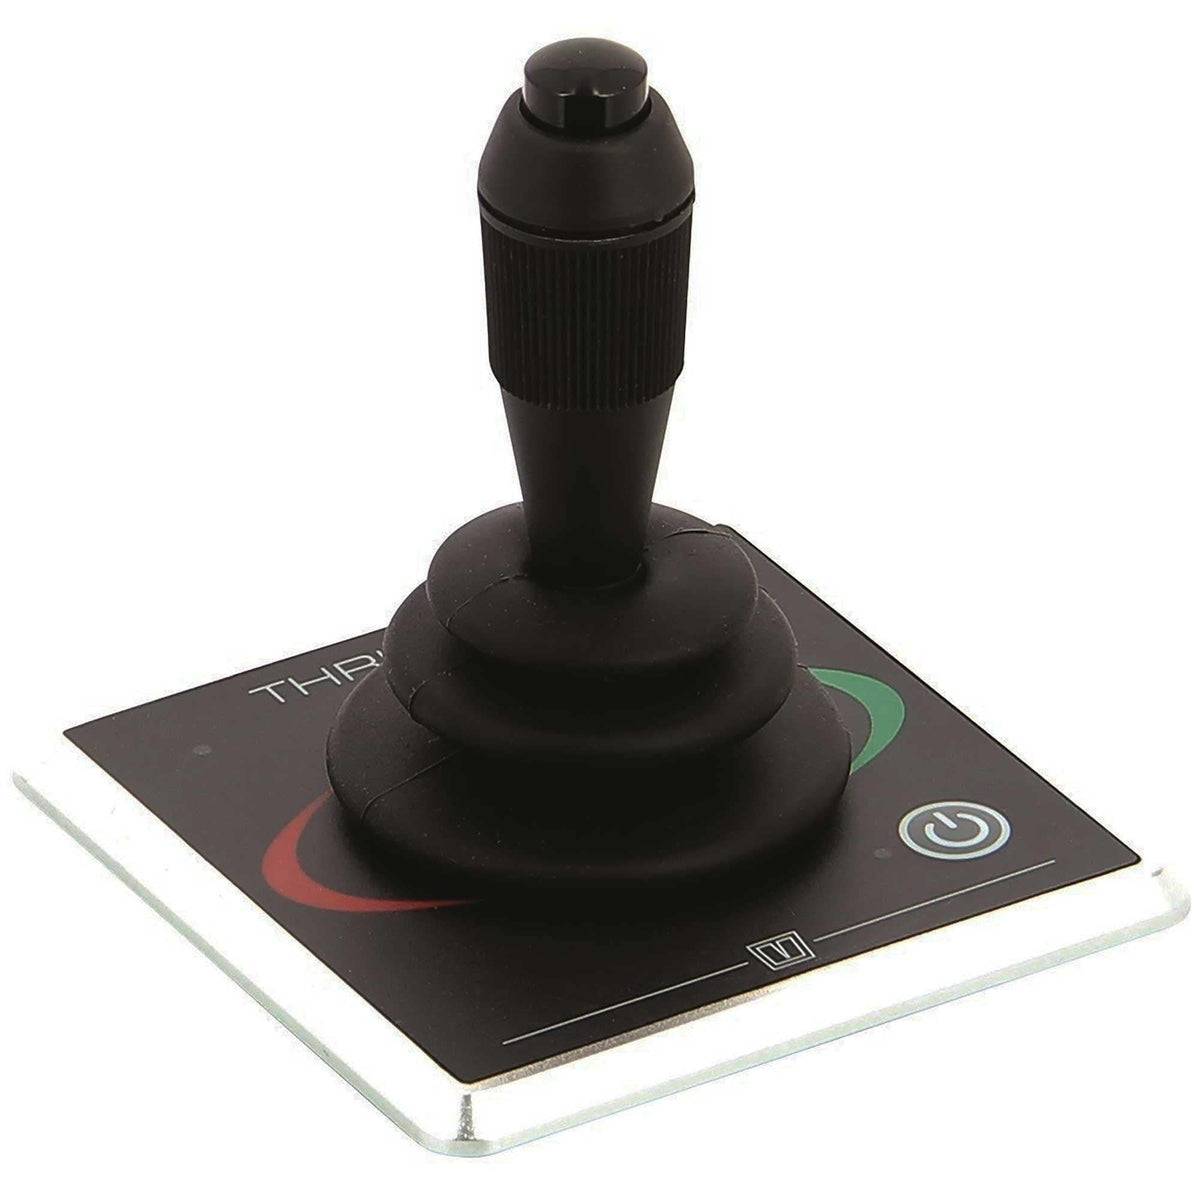 Picture of Vetus BPPJA Bow Pro Proportional Joystick with Hold